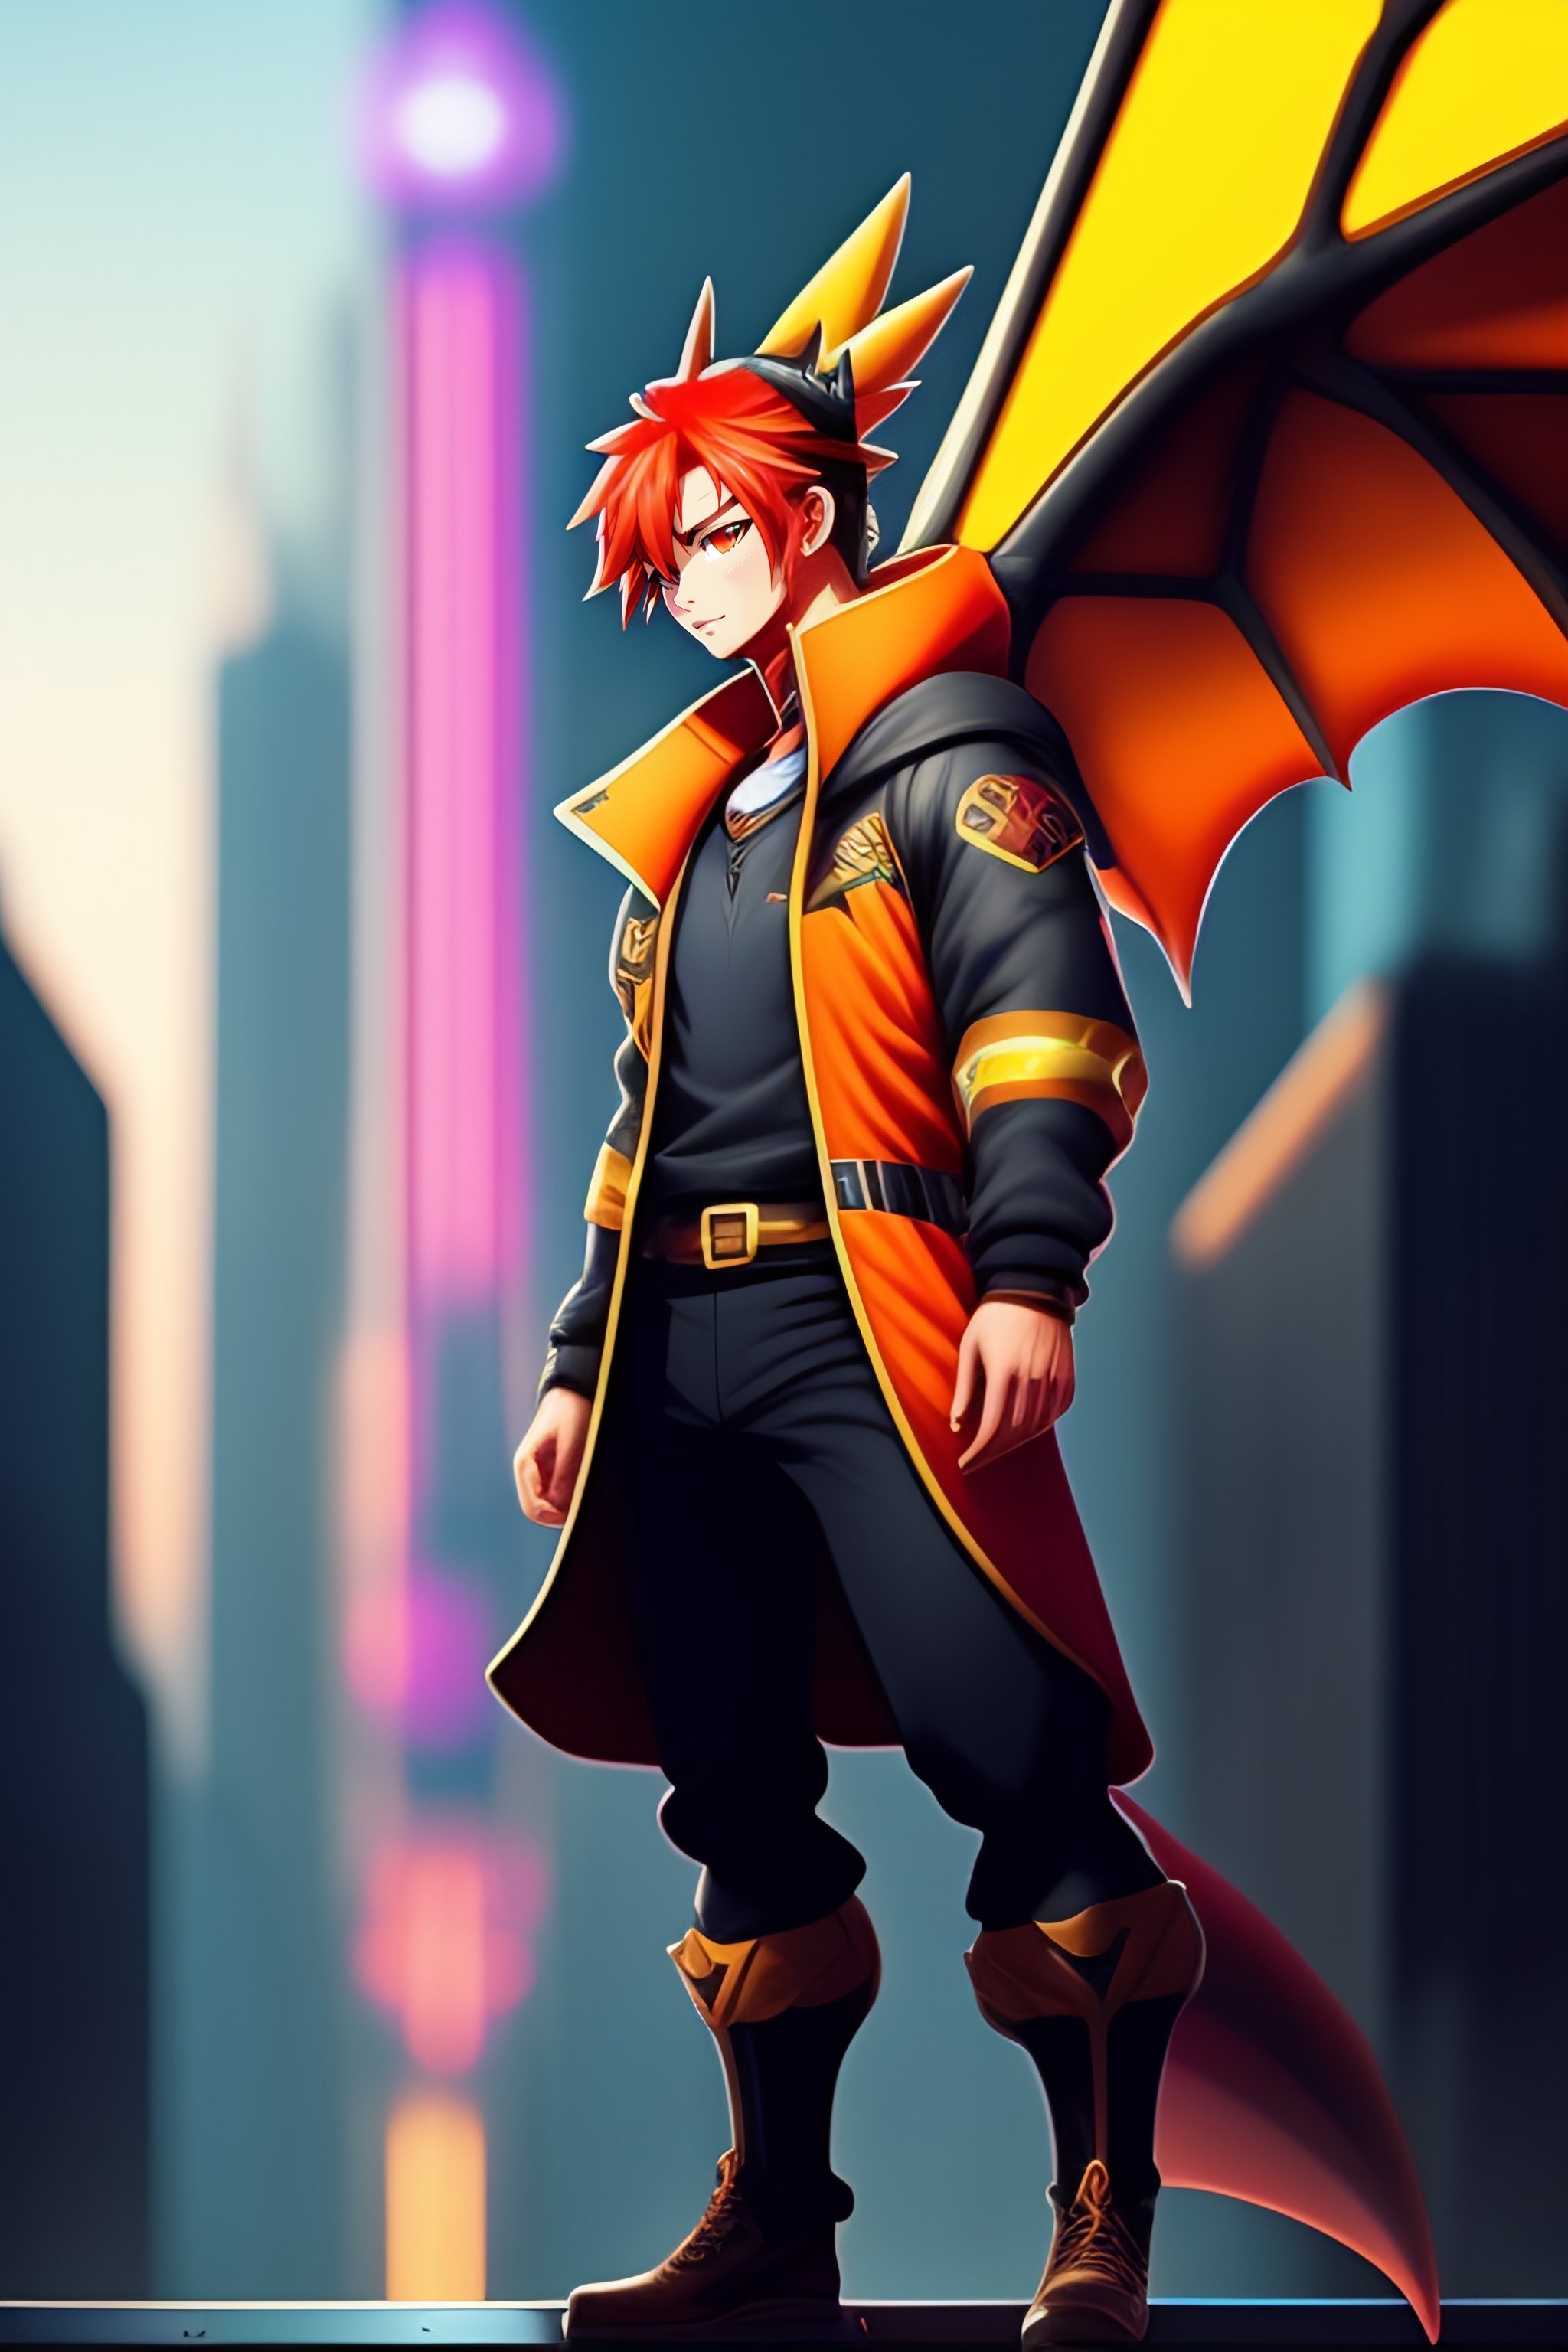 Lexica A Picture Of A Full Body Male Pokemon Trainer With A Flying Charizard In A Neo Punk 4275